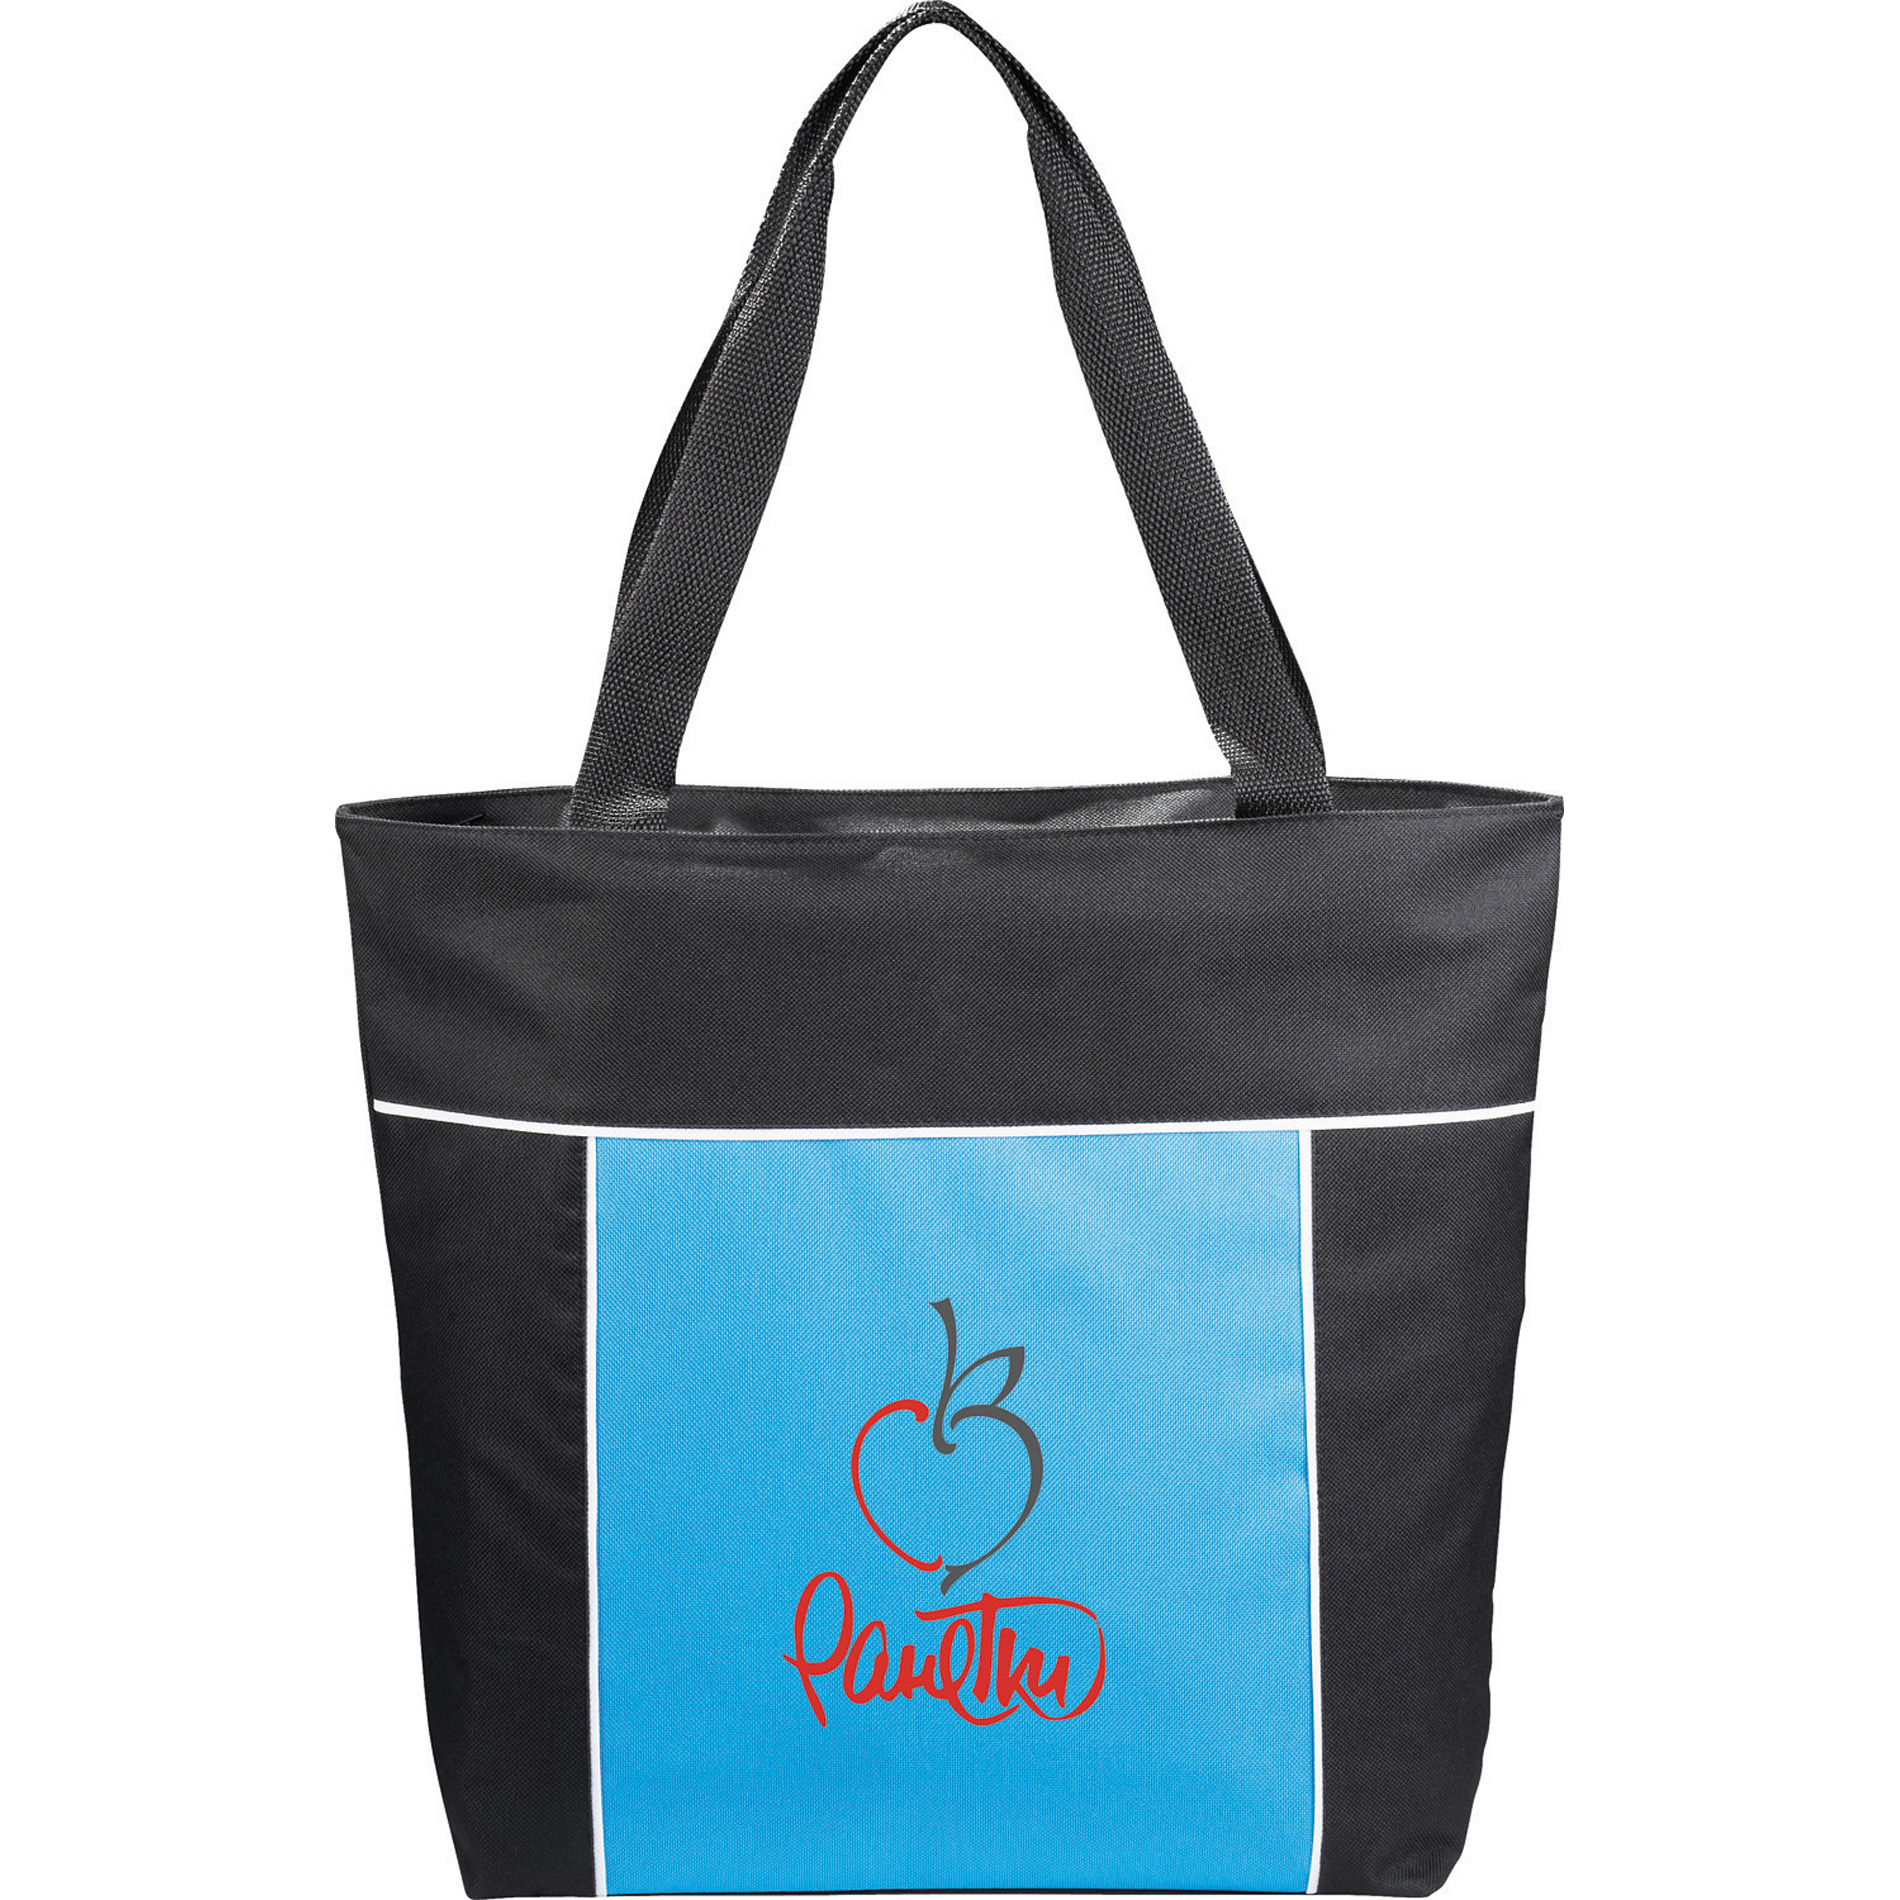 The Broadway Business Tote | Trade Show Totes - 24HourWristbands.Com